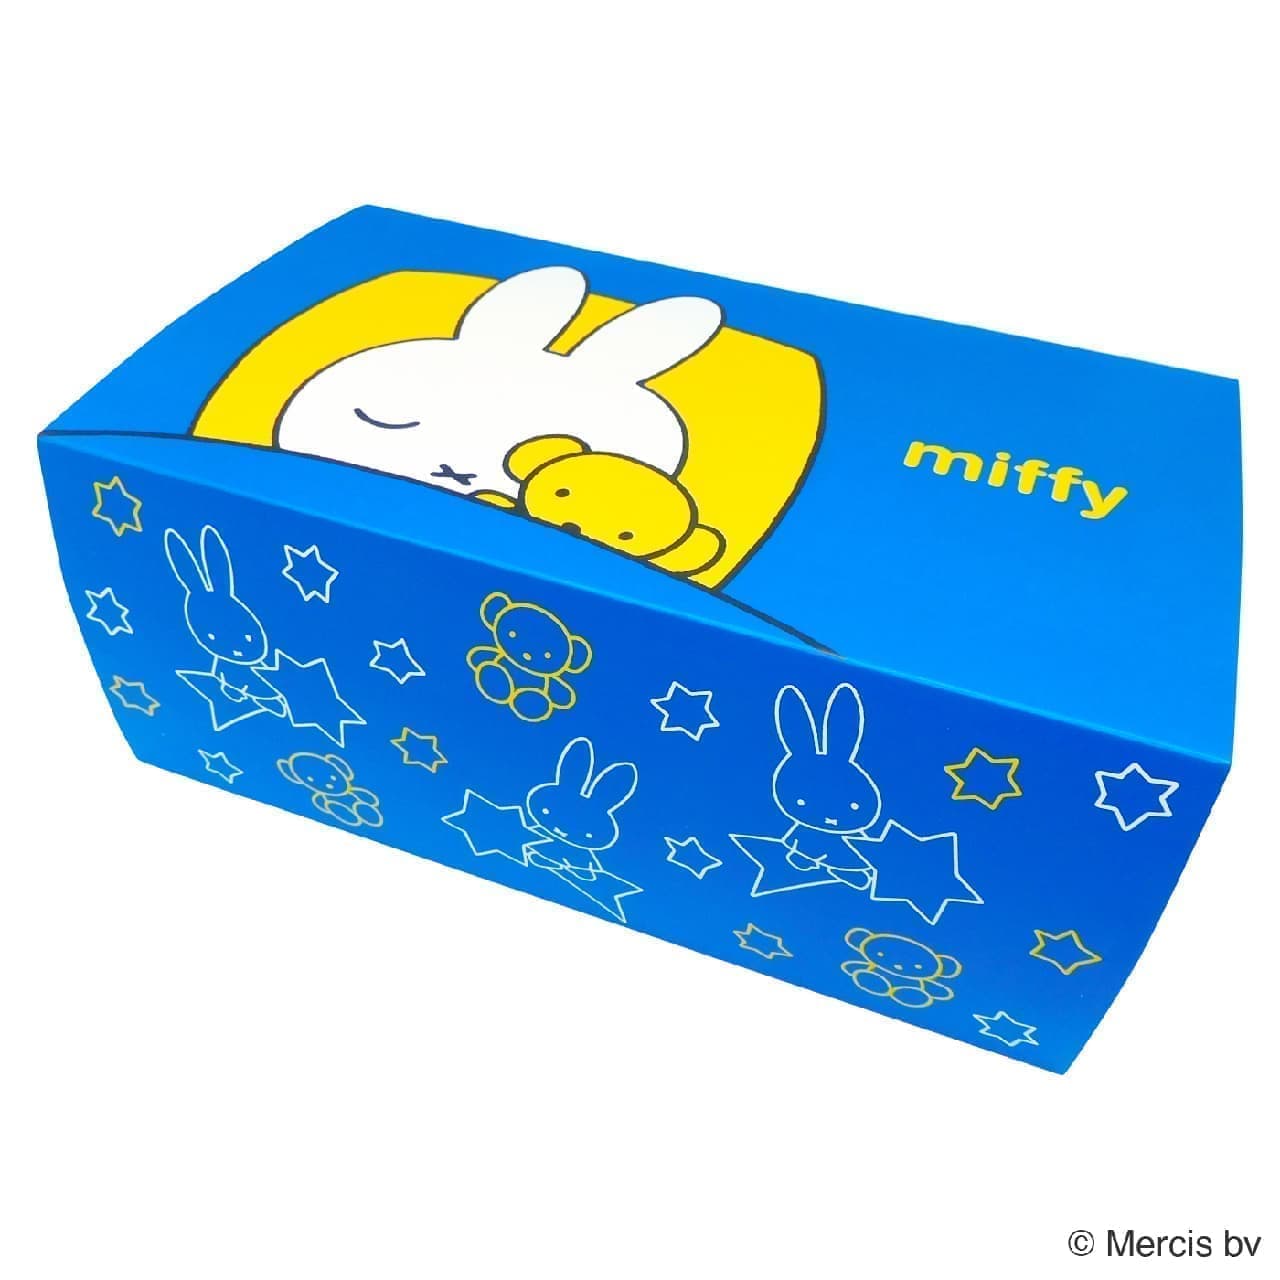 New product summary of Japanese masks for adults --Moomin, Snoopy, Miffy